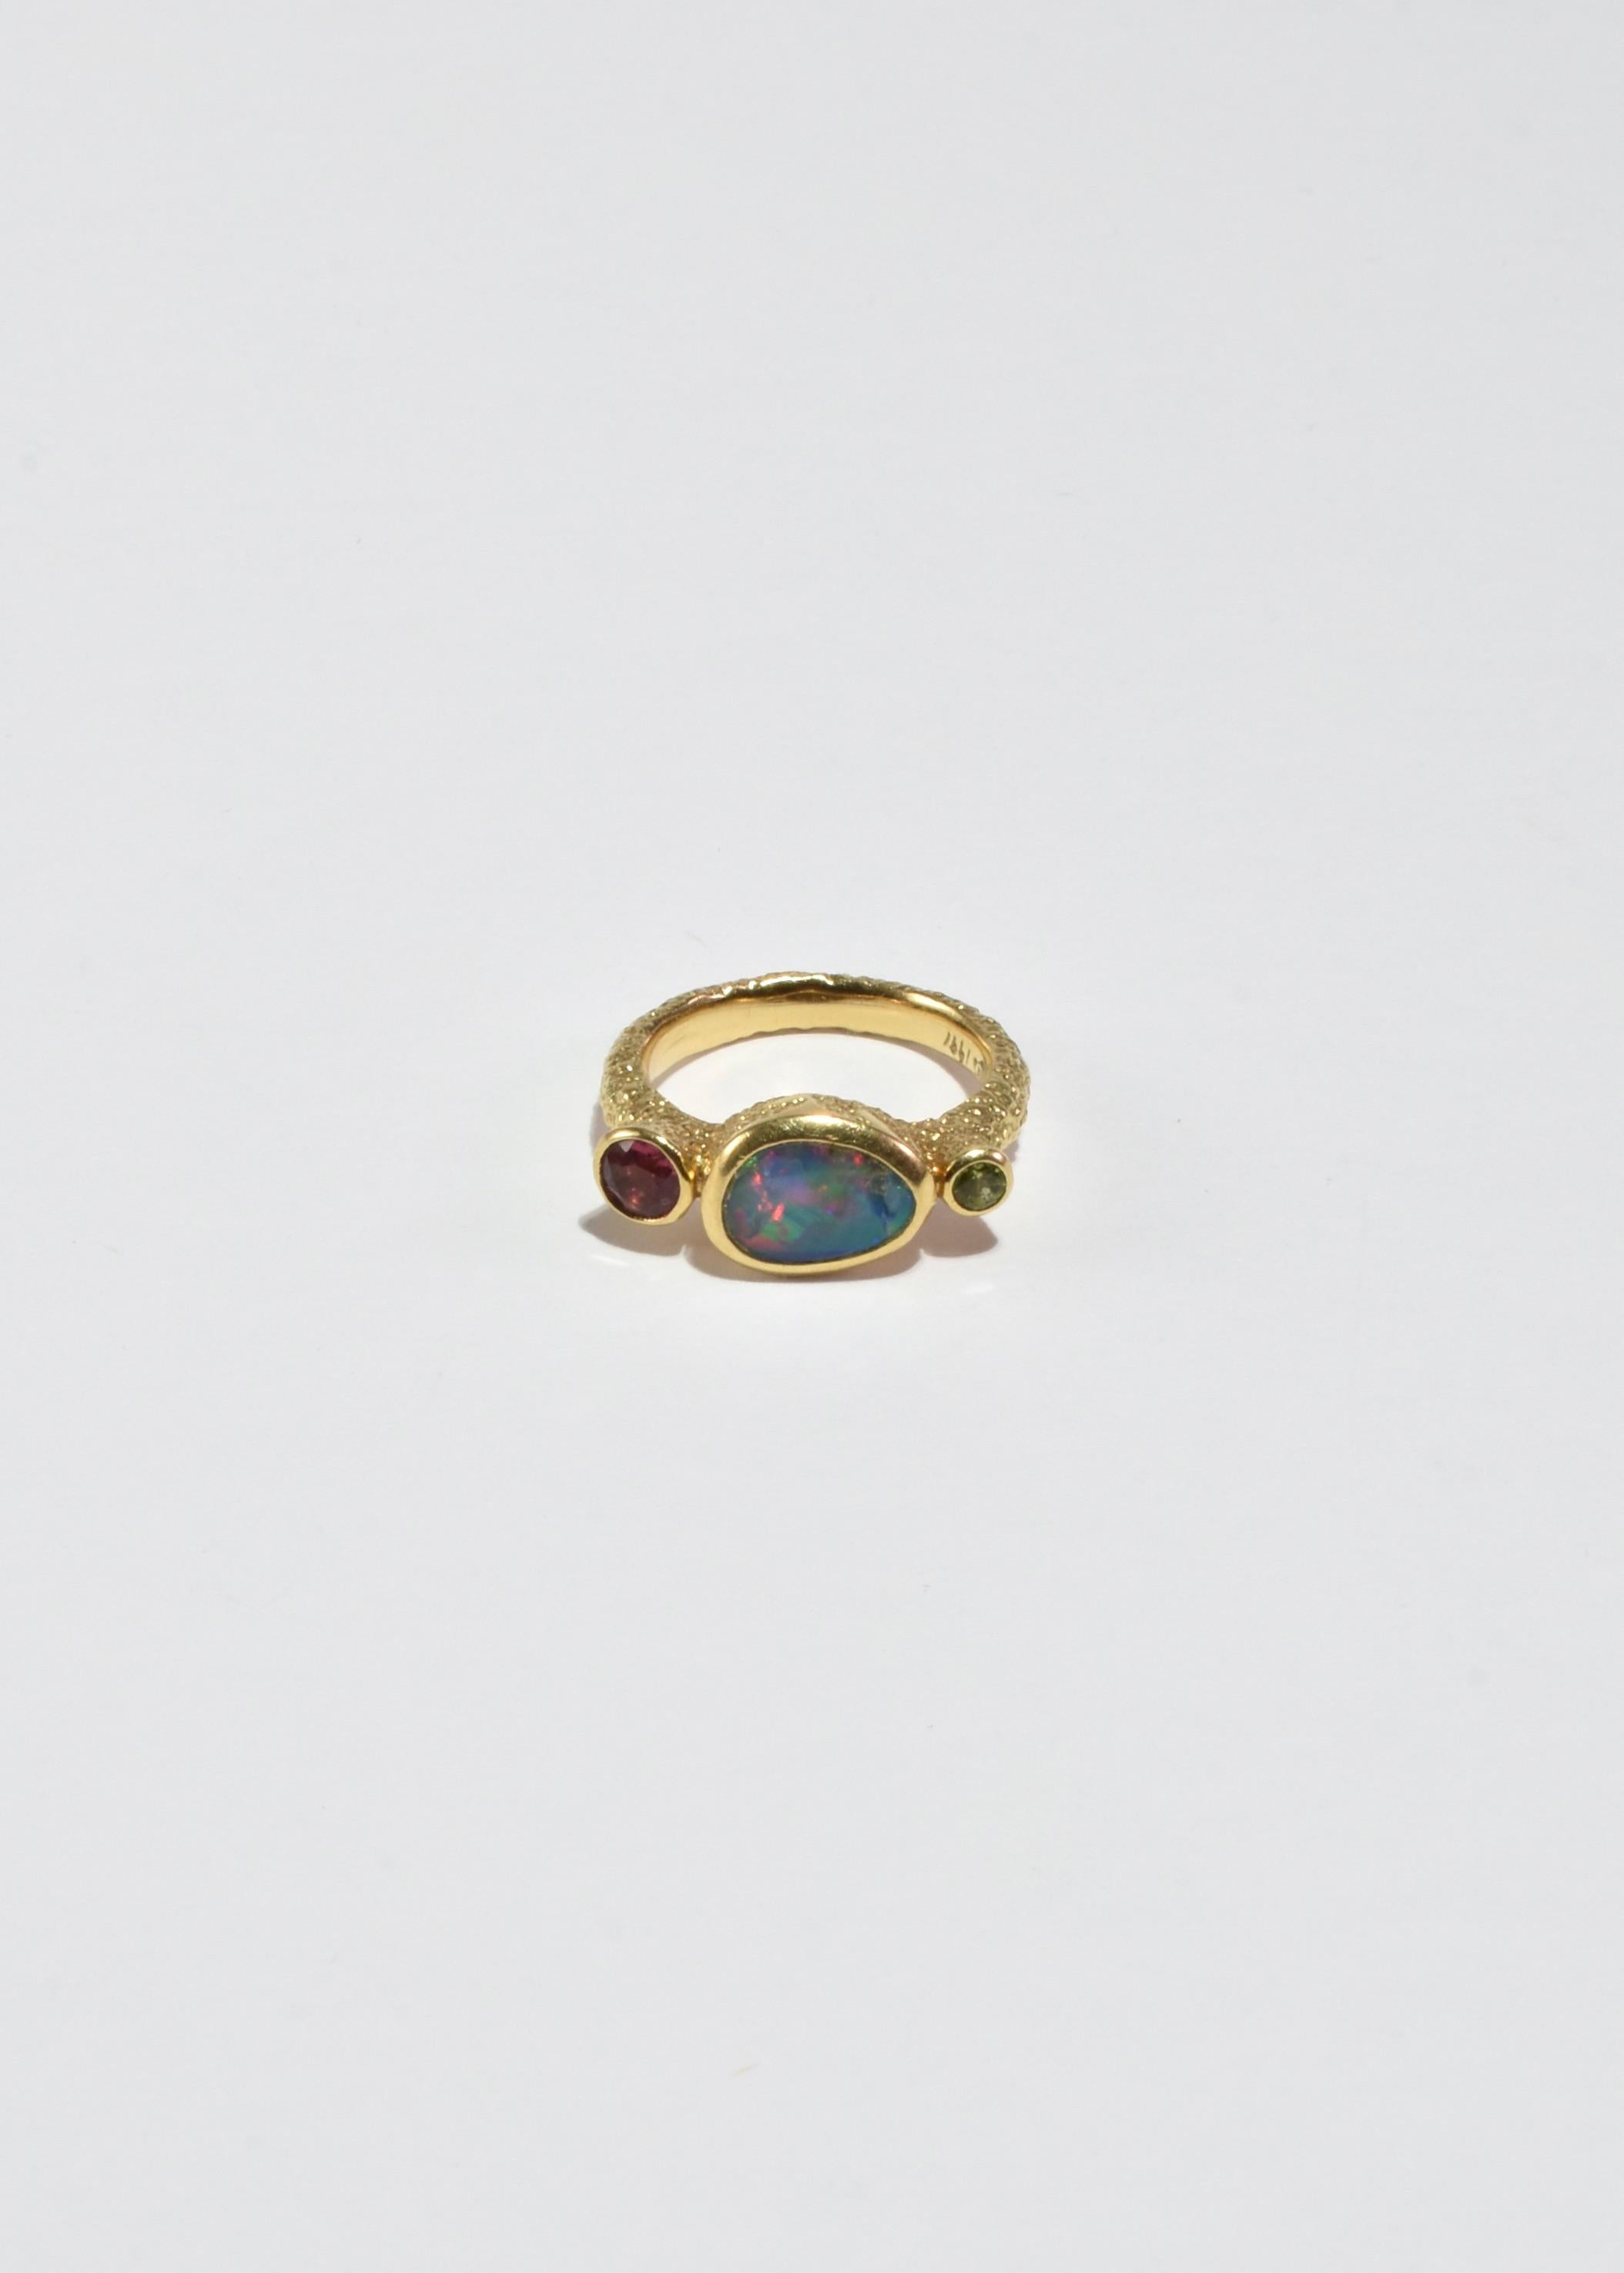 Stunning vintage hand-crafted gold ring with texture detail and opal, peridot, and ruby stones. Signed 18k, 1991.

Material: 18k gold, opal, peridot, ruby.